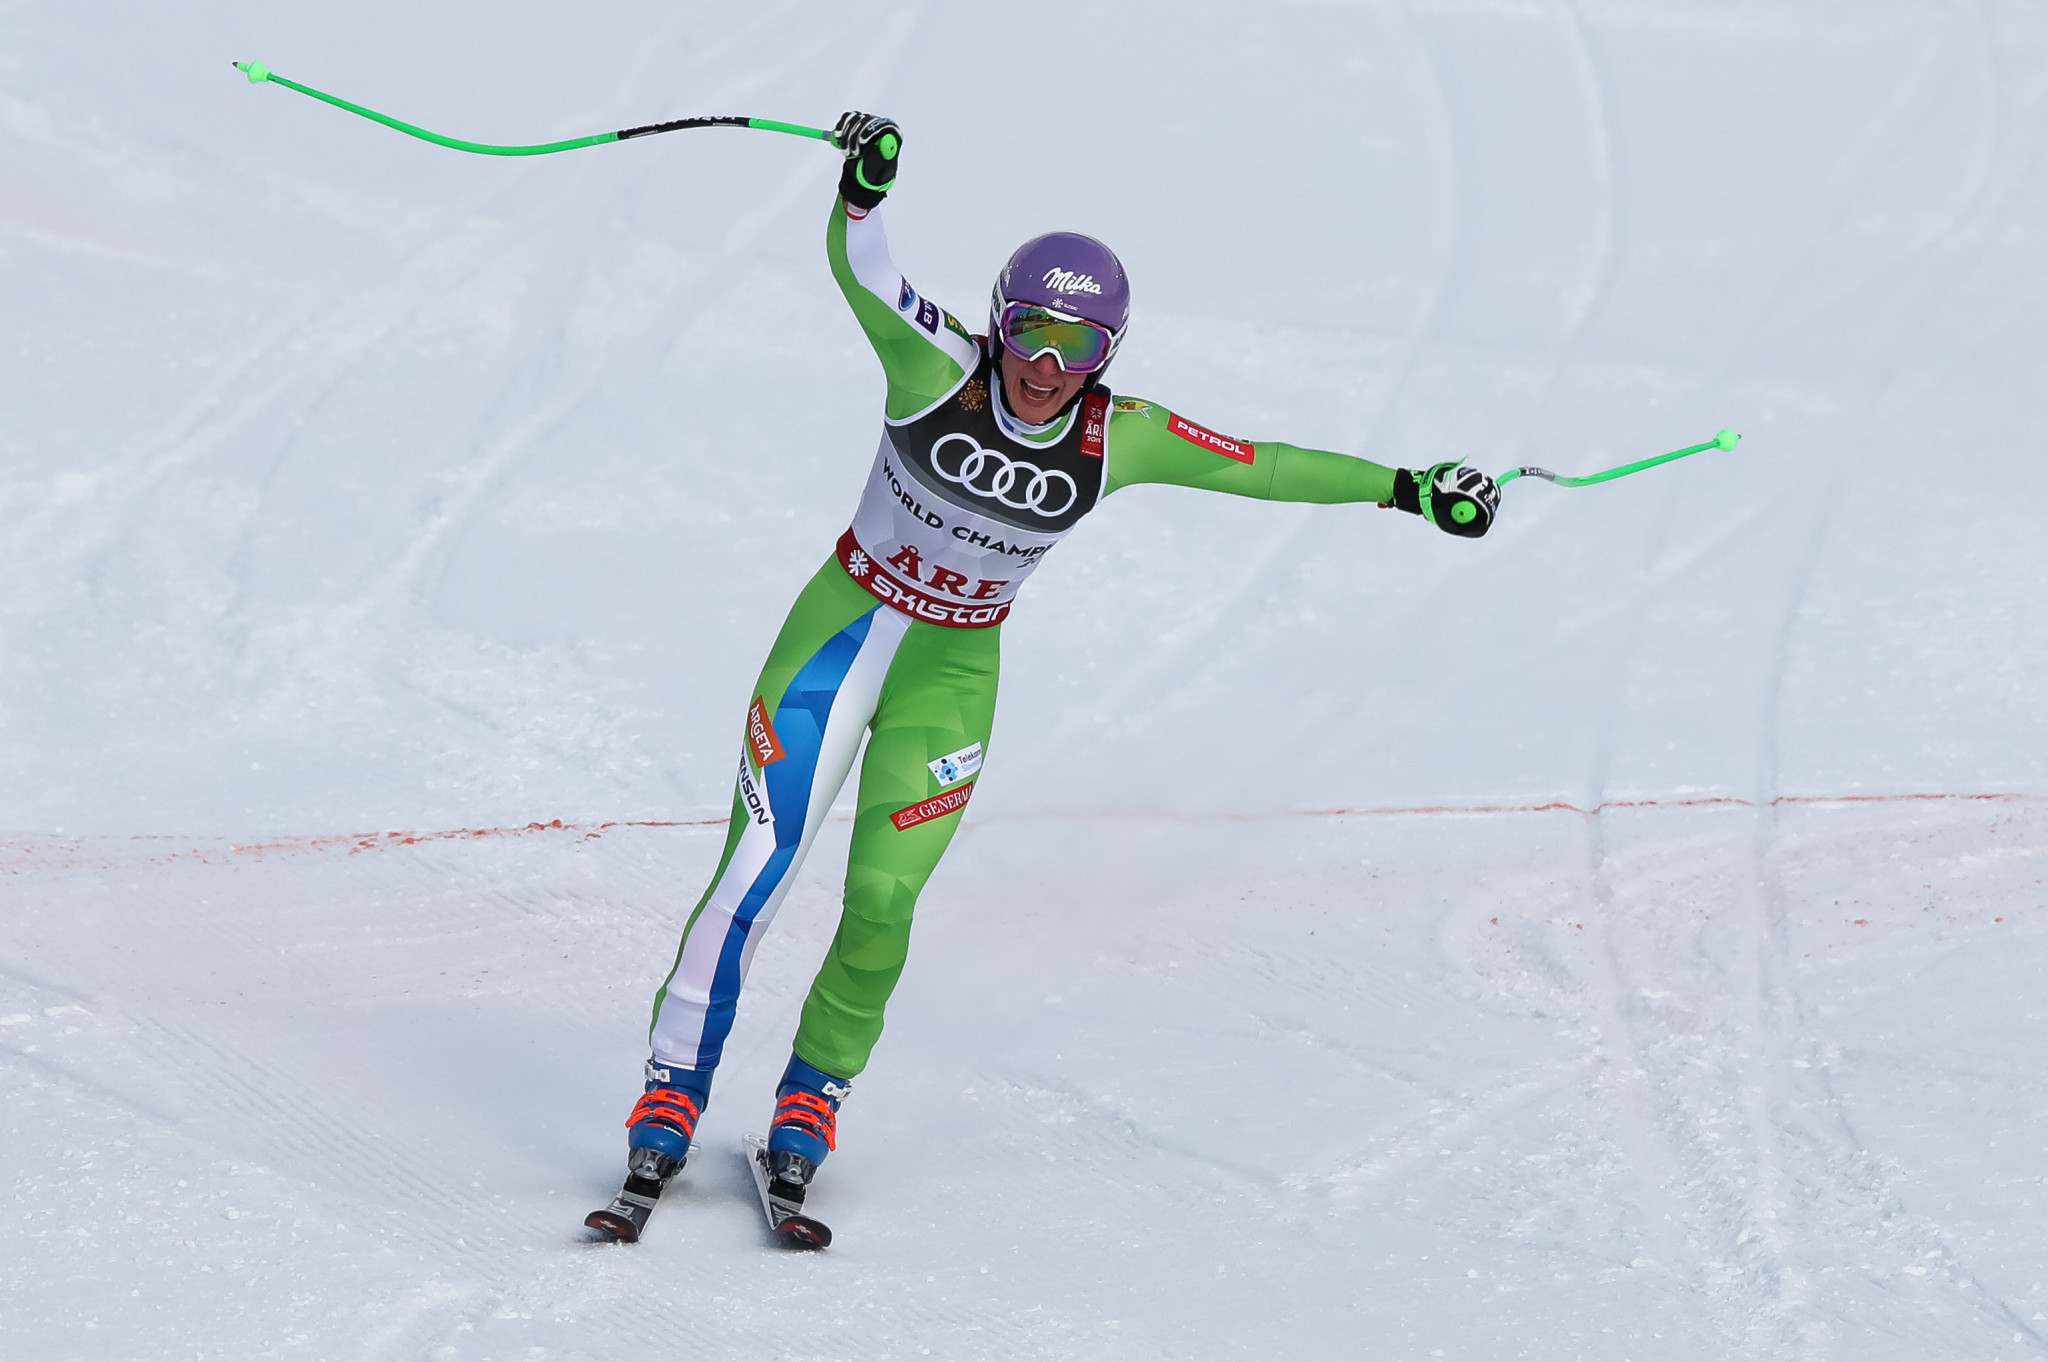 Štuhec defends downhill title as Vonn bows out with bronze at FIS Alpine Skiing World Championships